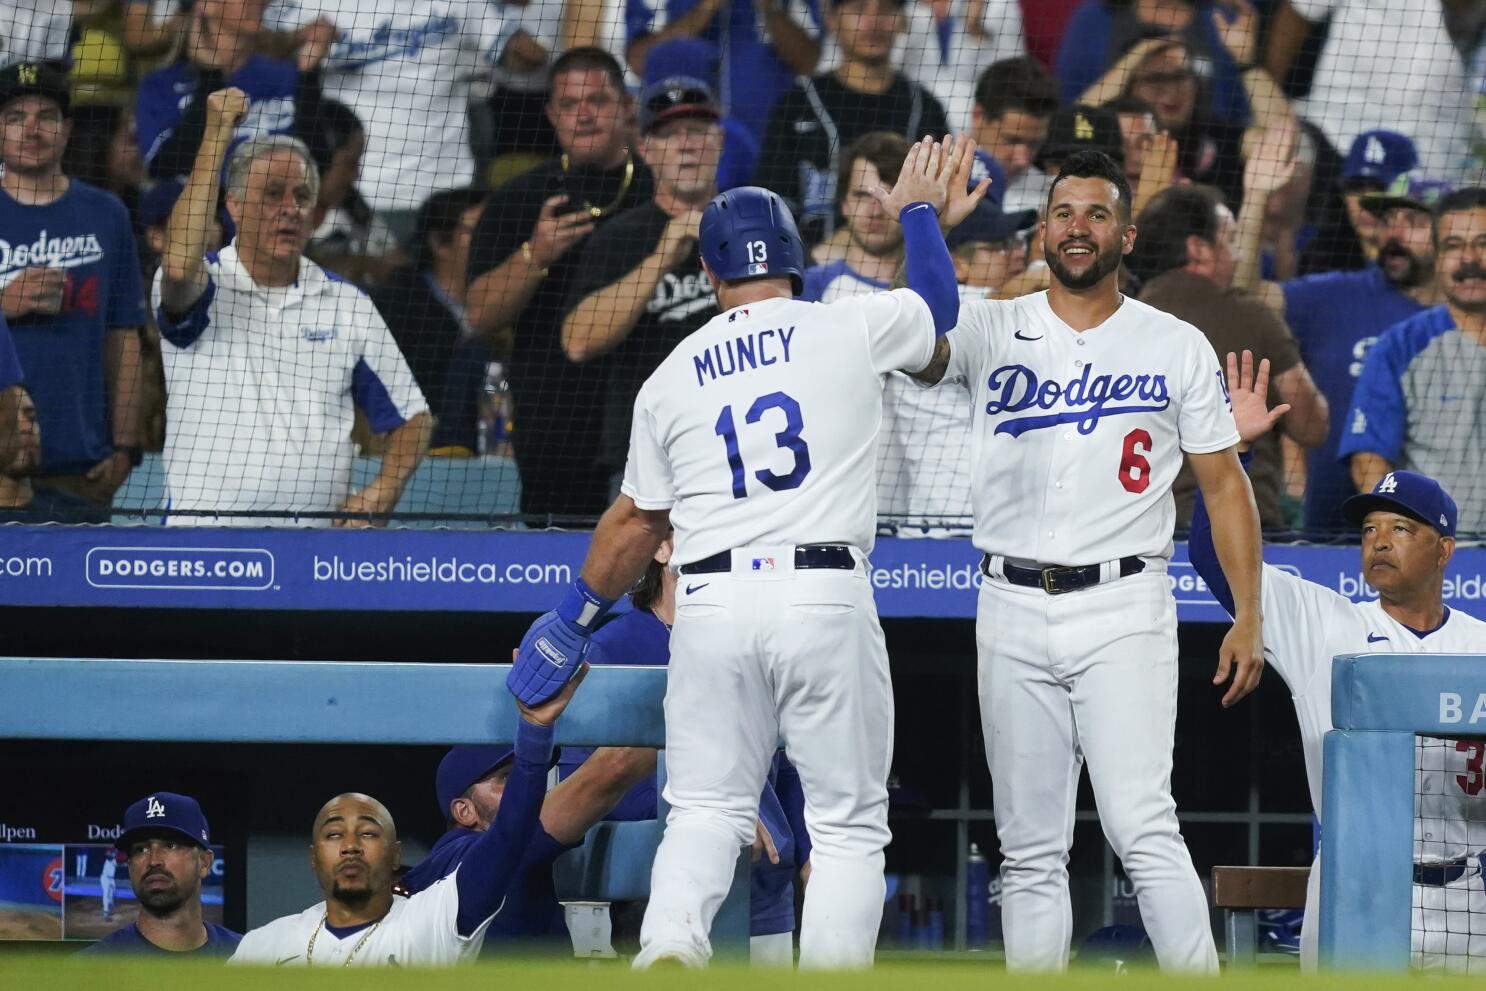 Dodgers win 9th in a row with 6-2 victory over Brewers in matchup of NL  division leaders - The San Diego Union-Tribune